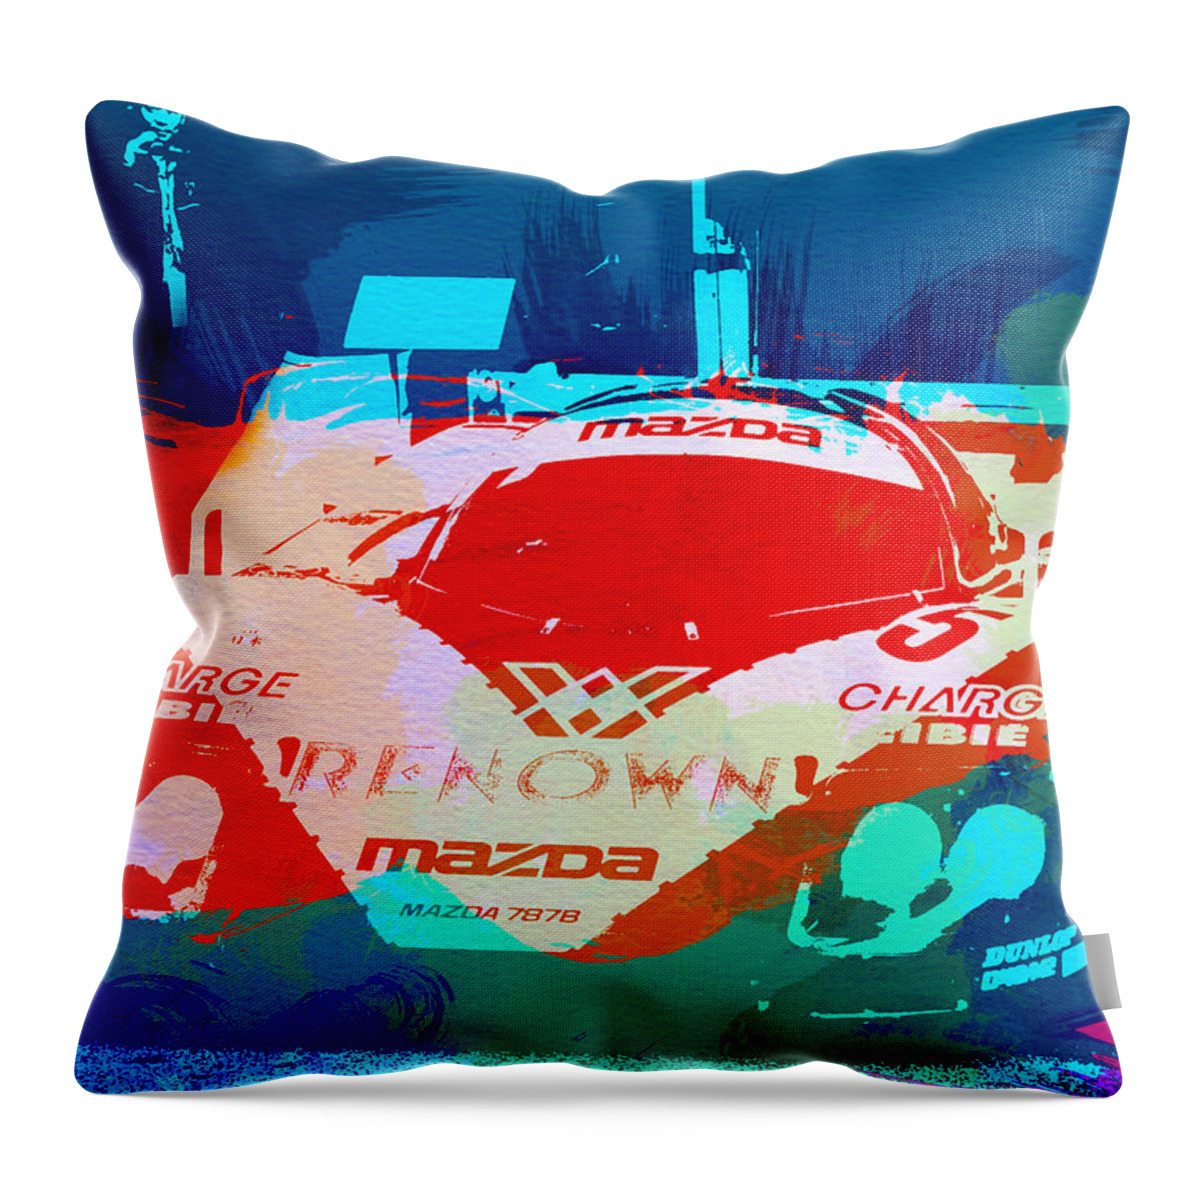 Mazda Throw Pillow featuring the painting Mazda Le Mans by Naxart Studio